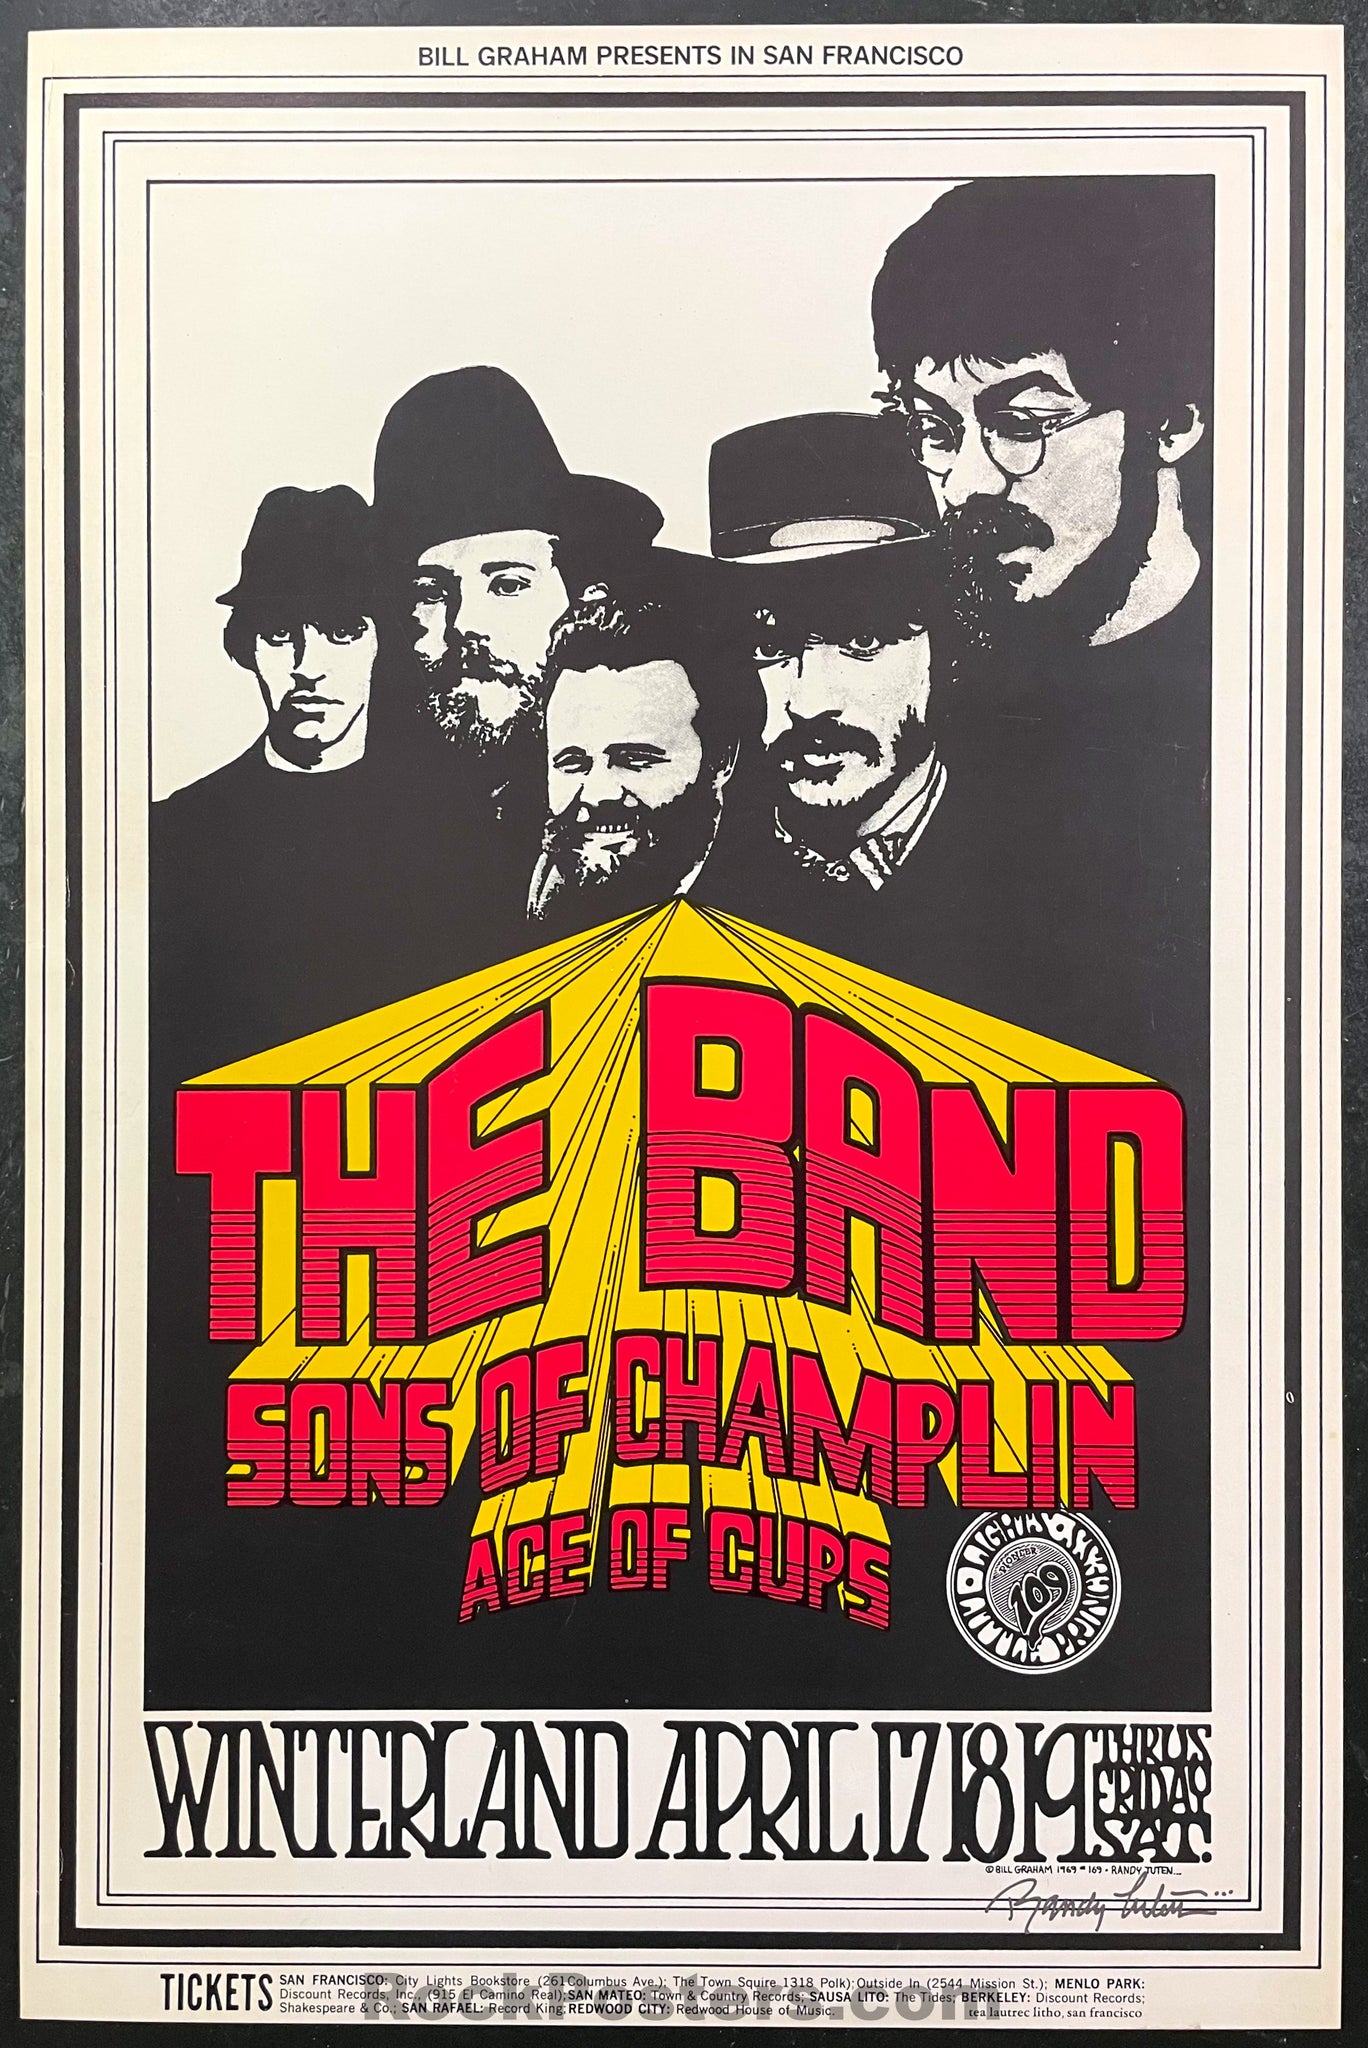 AUCTION - BG-169 - The Band - Randy Tuten Signed - 1969 Poster - Winterland - Excellent